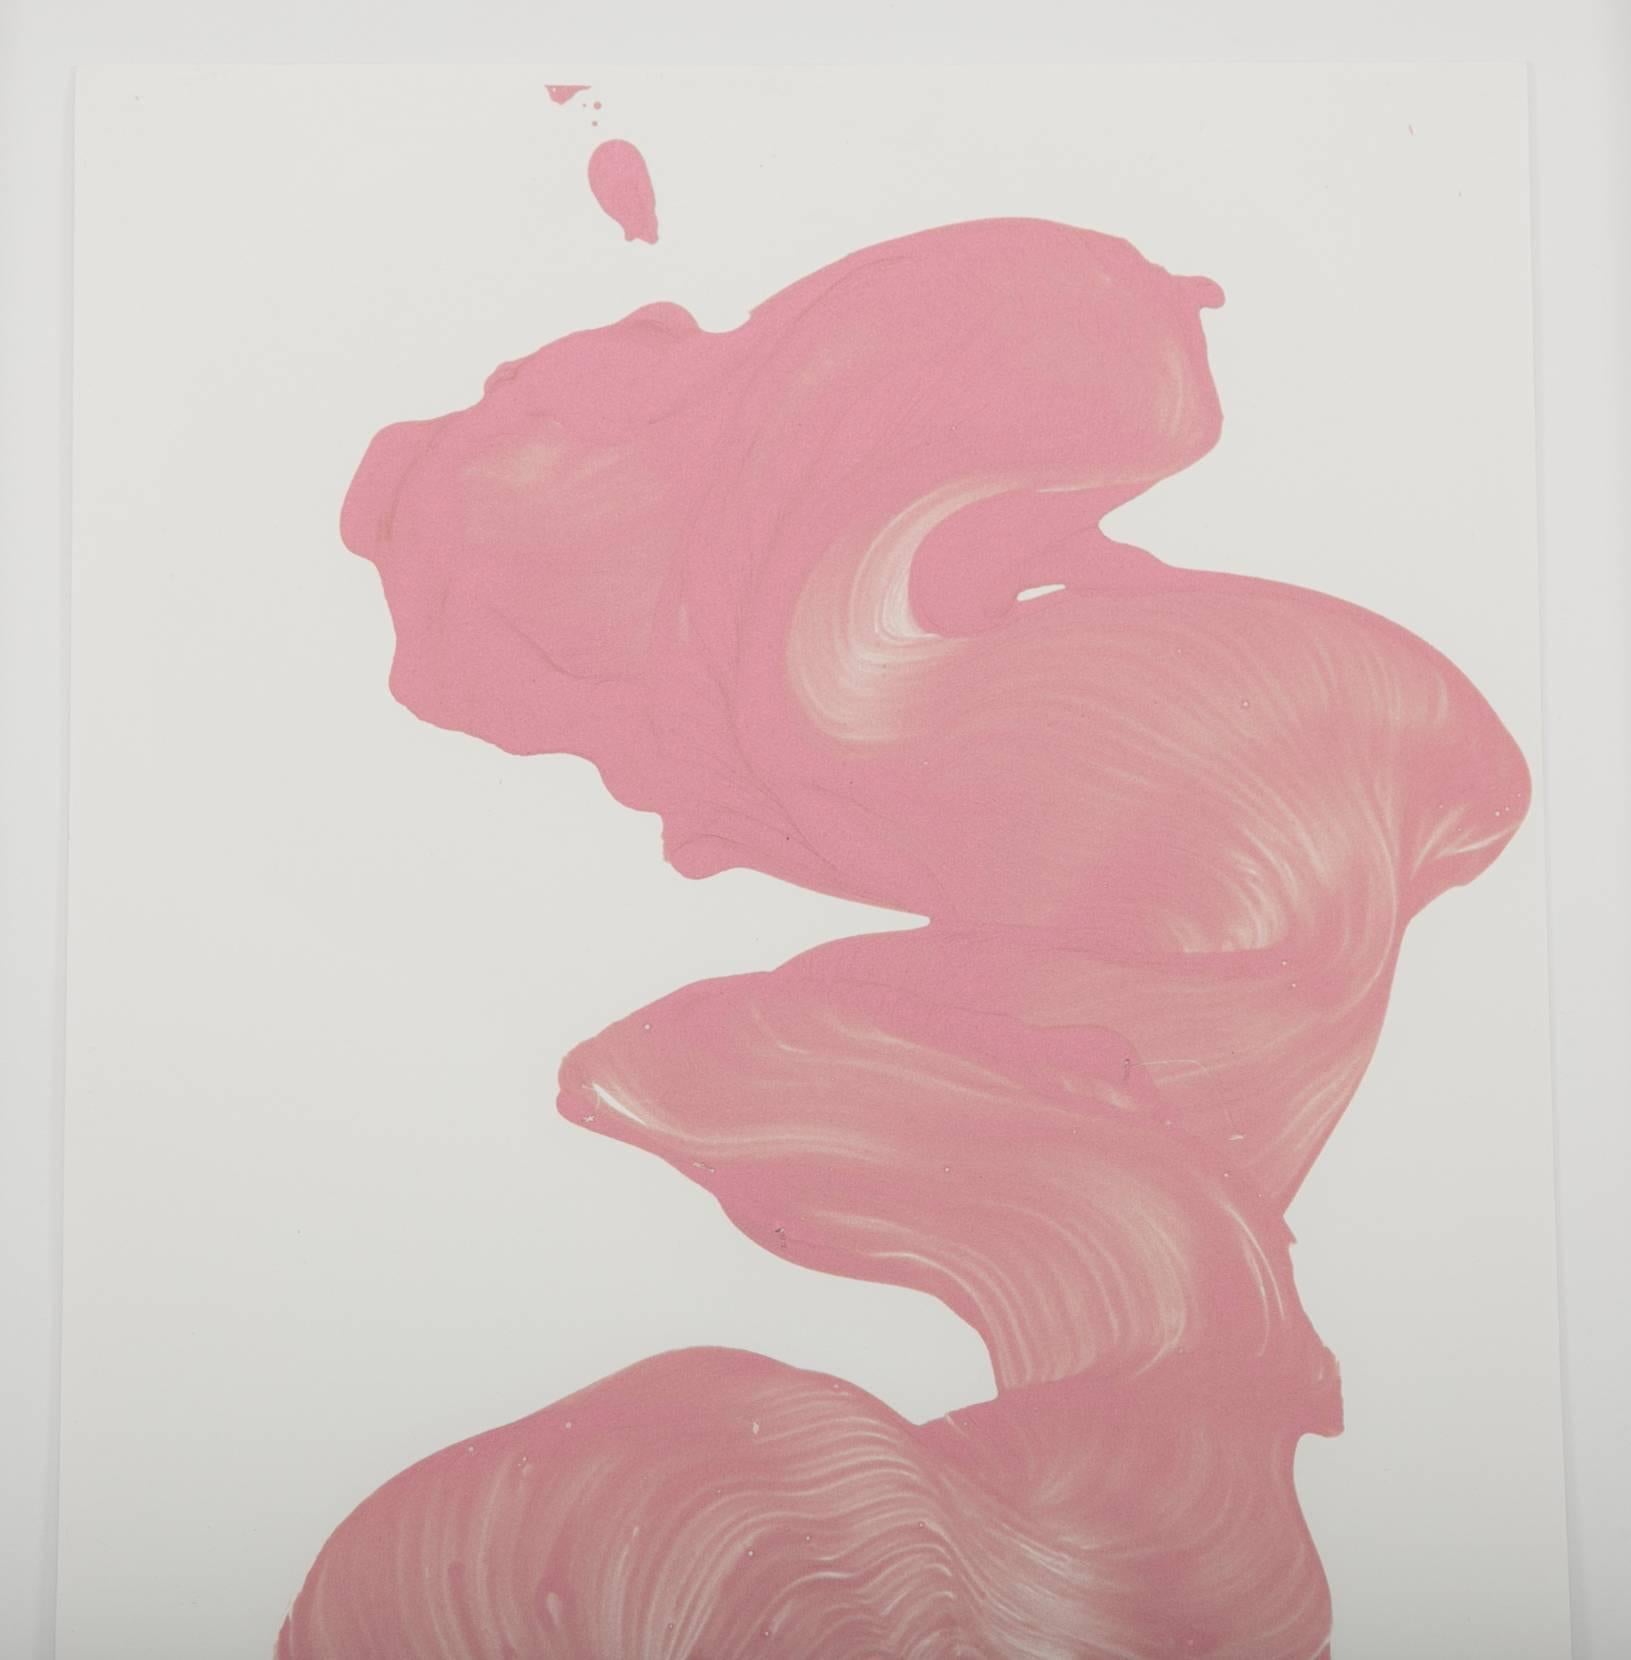 Unique oil paint and wax on paper by James Nares ( British, b. 1953 ). Untitled. circa 2008. Archivally framed in a 12-karat white gold frame.